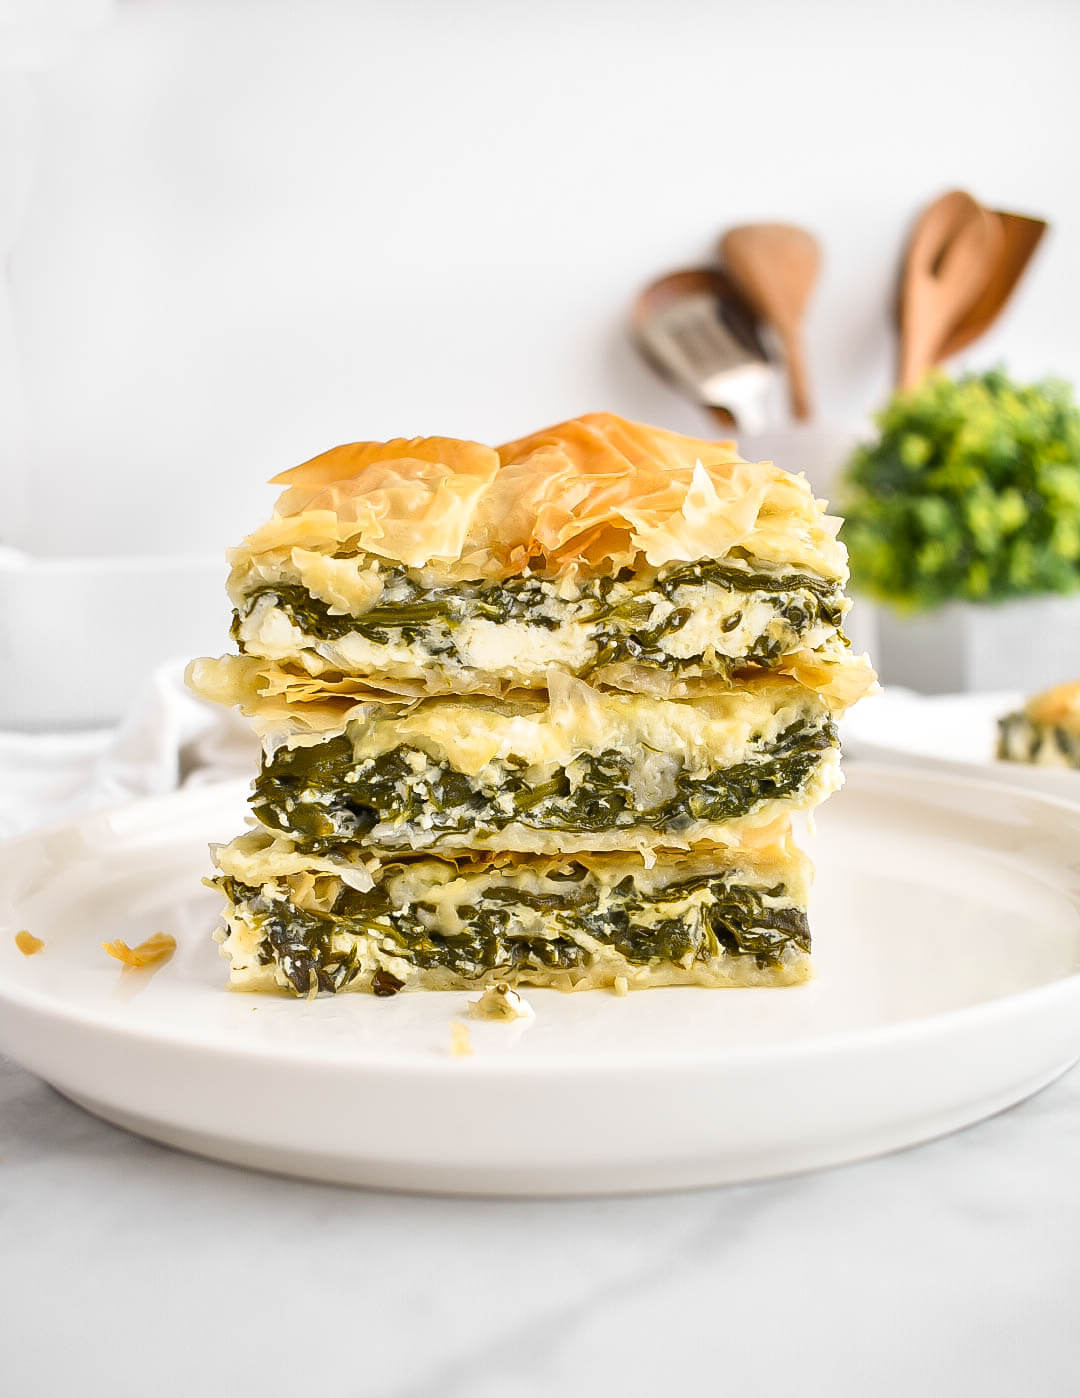 3 stacked slices of spanakopita on a plate.